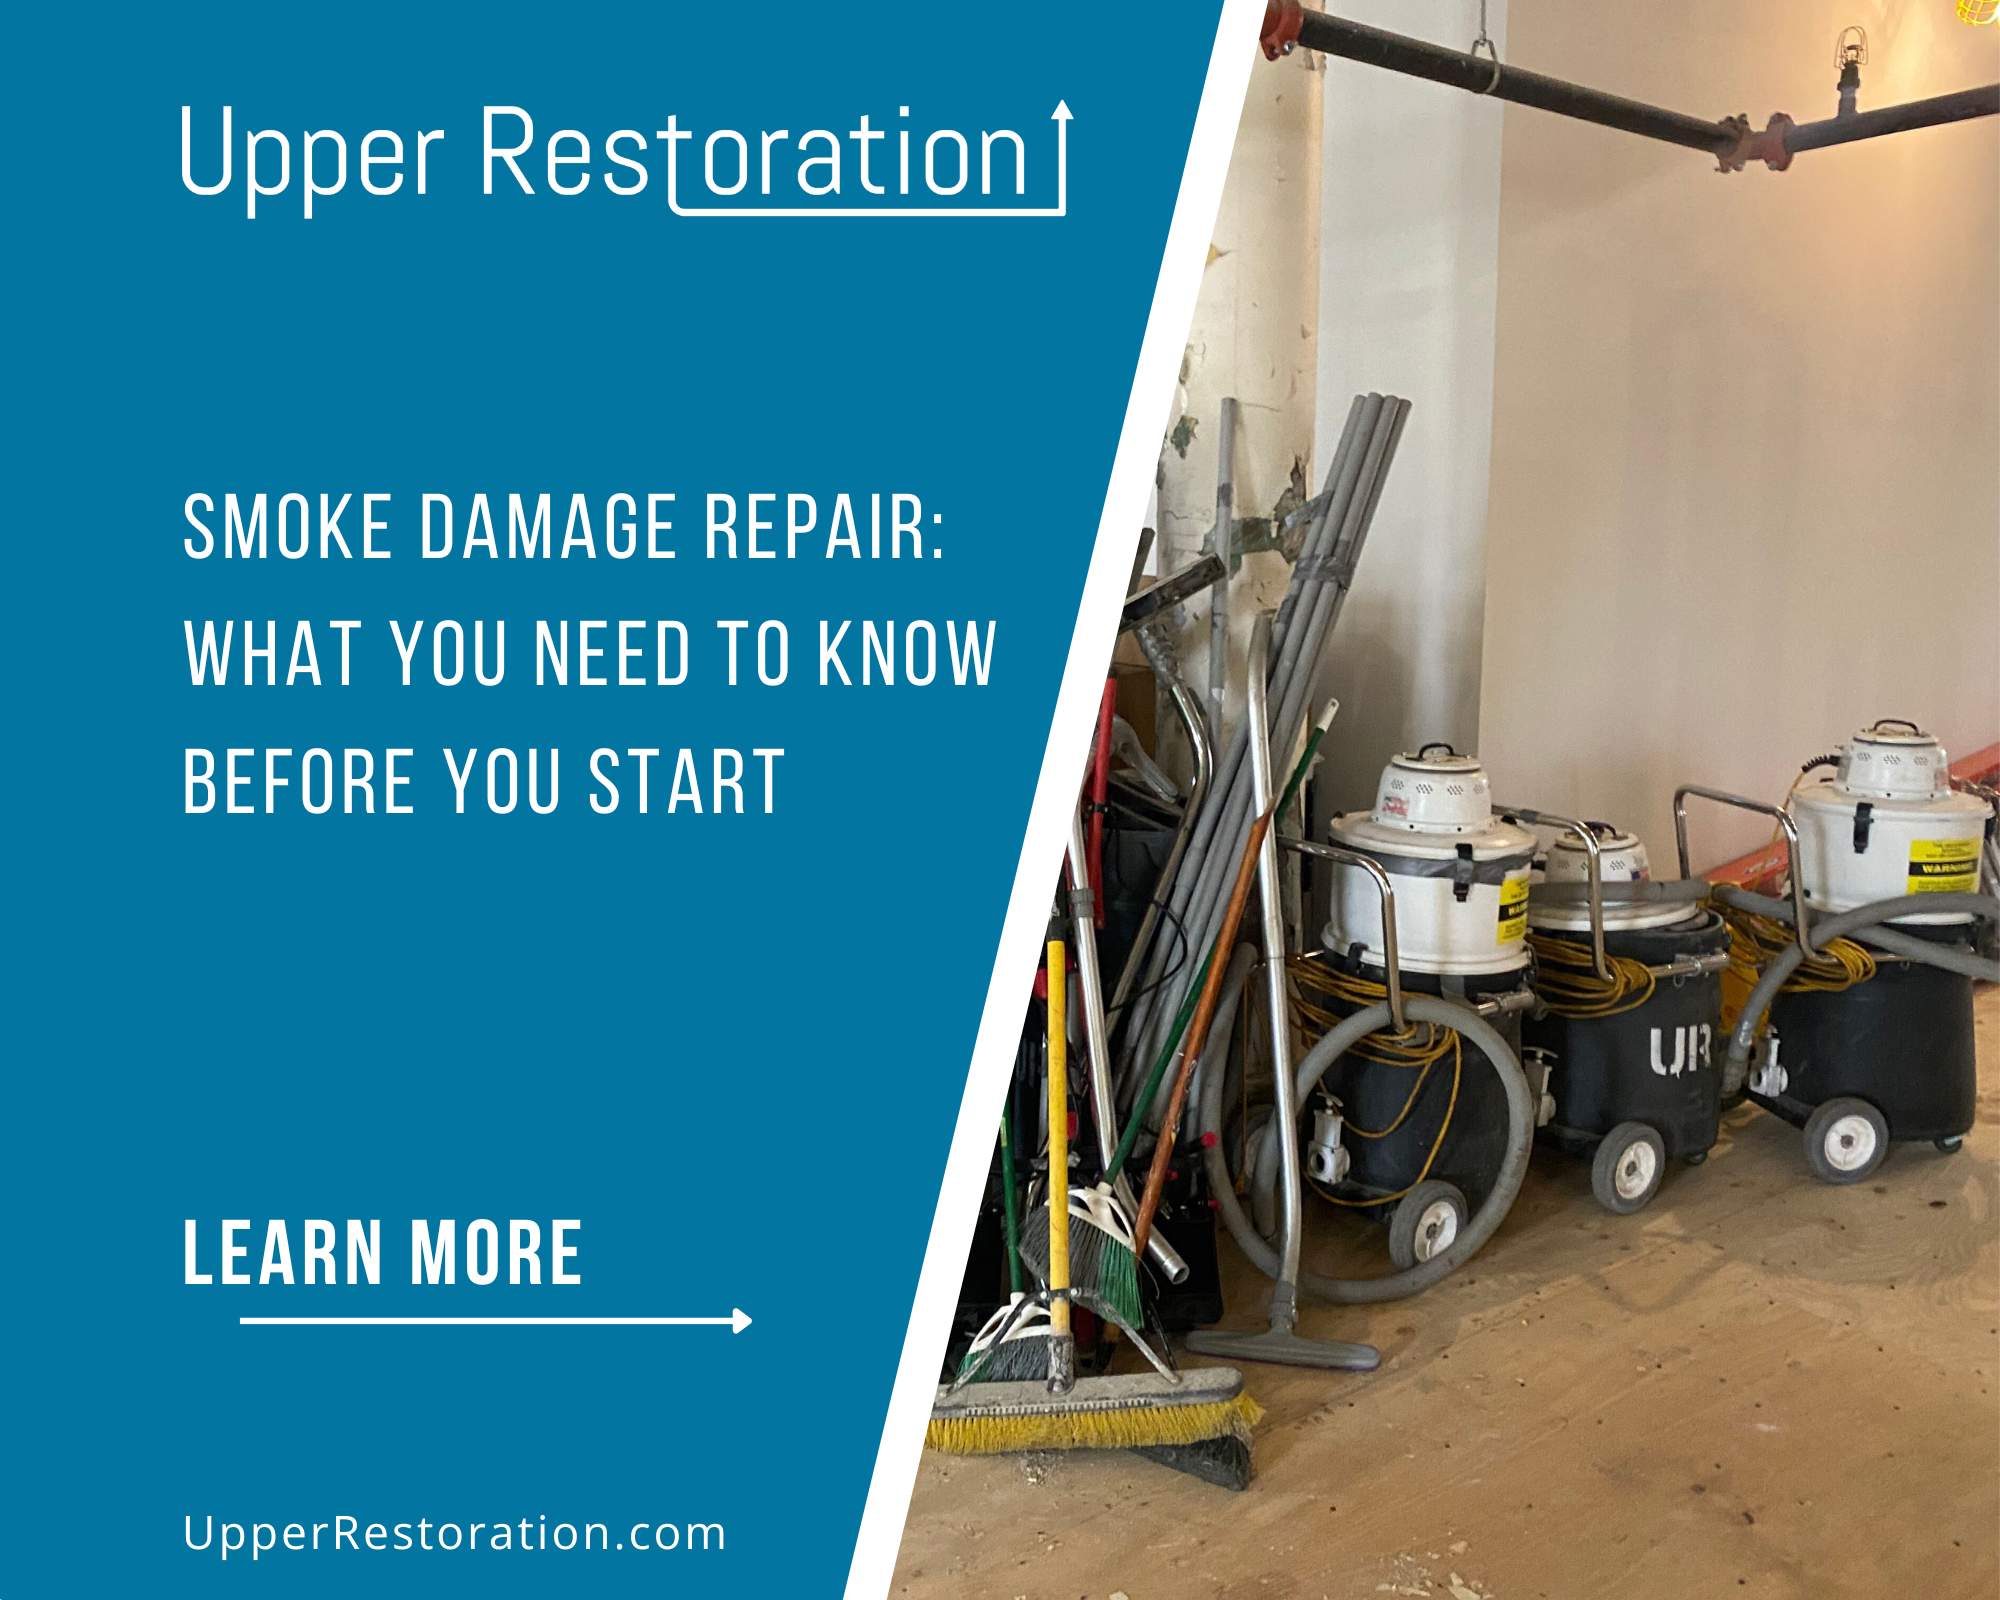 Smoke Damage Repair: What You Need to Know Before You Start